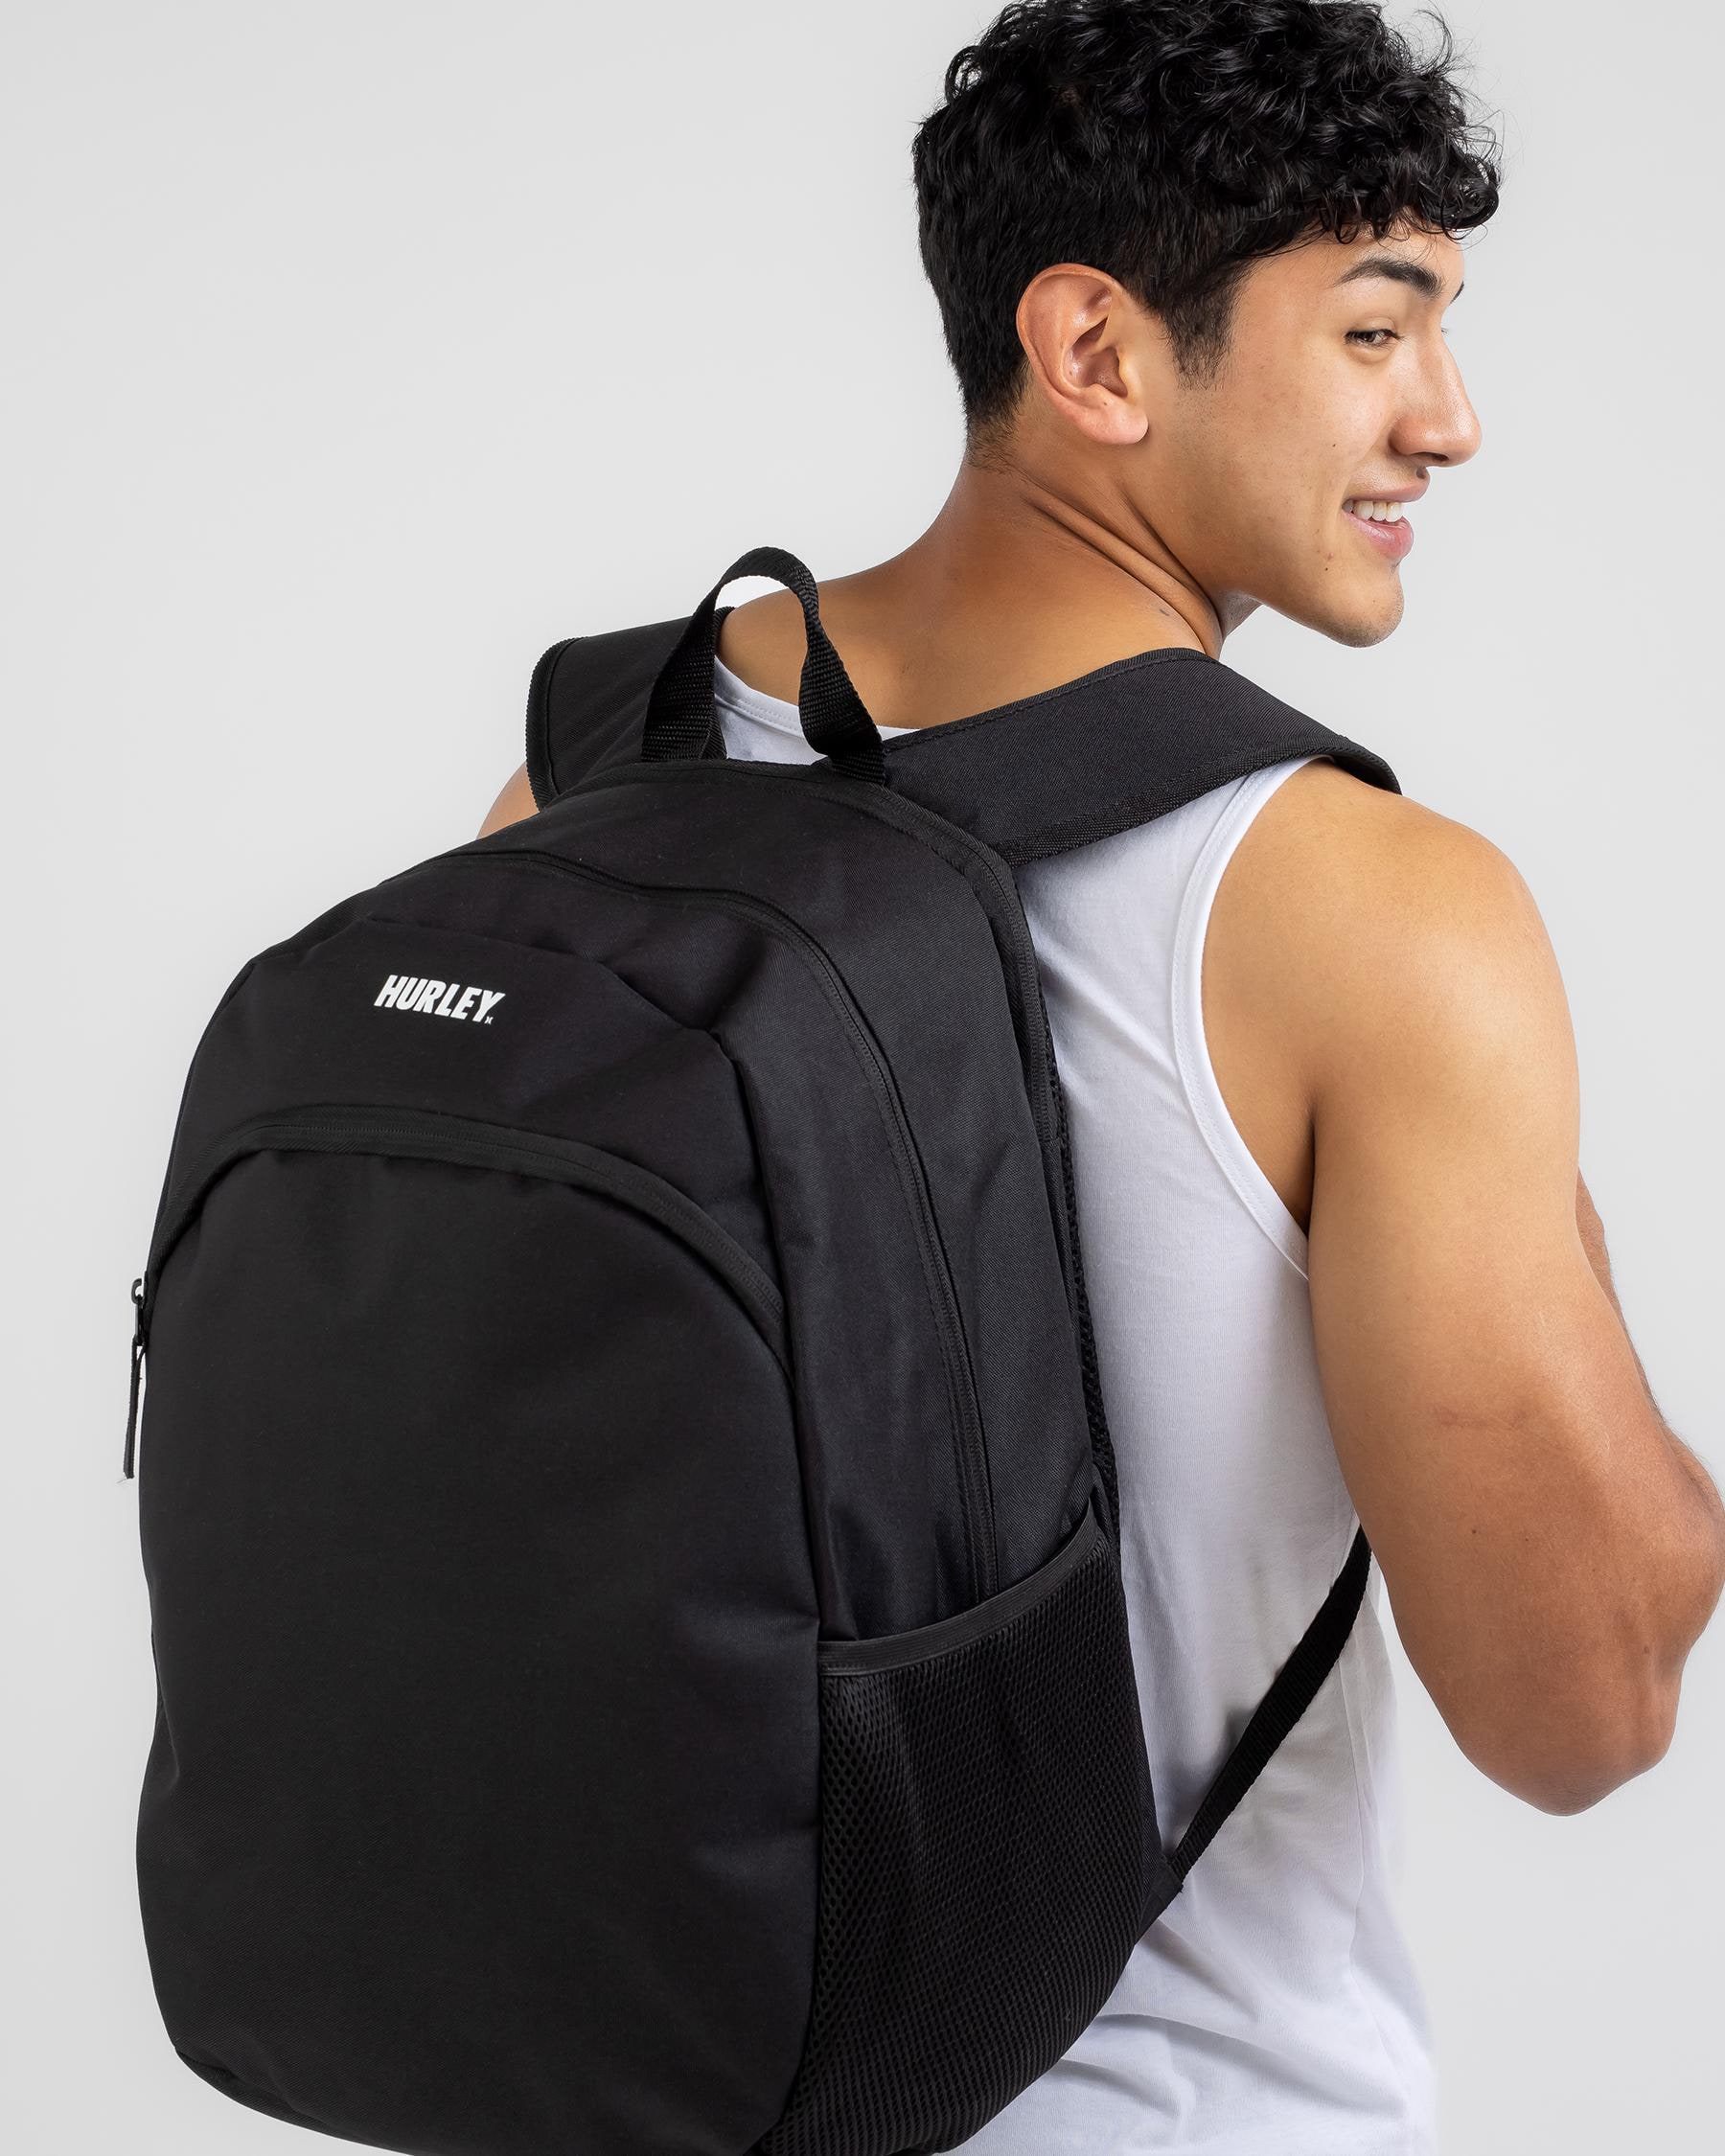 Hurley Fastlane Backpack In Black - Fast Shipping & Easy Returns - City  Beach United States